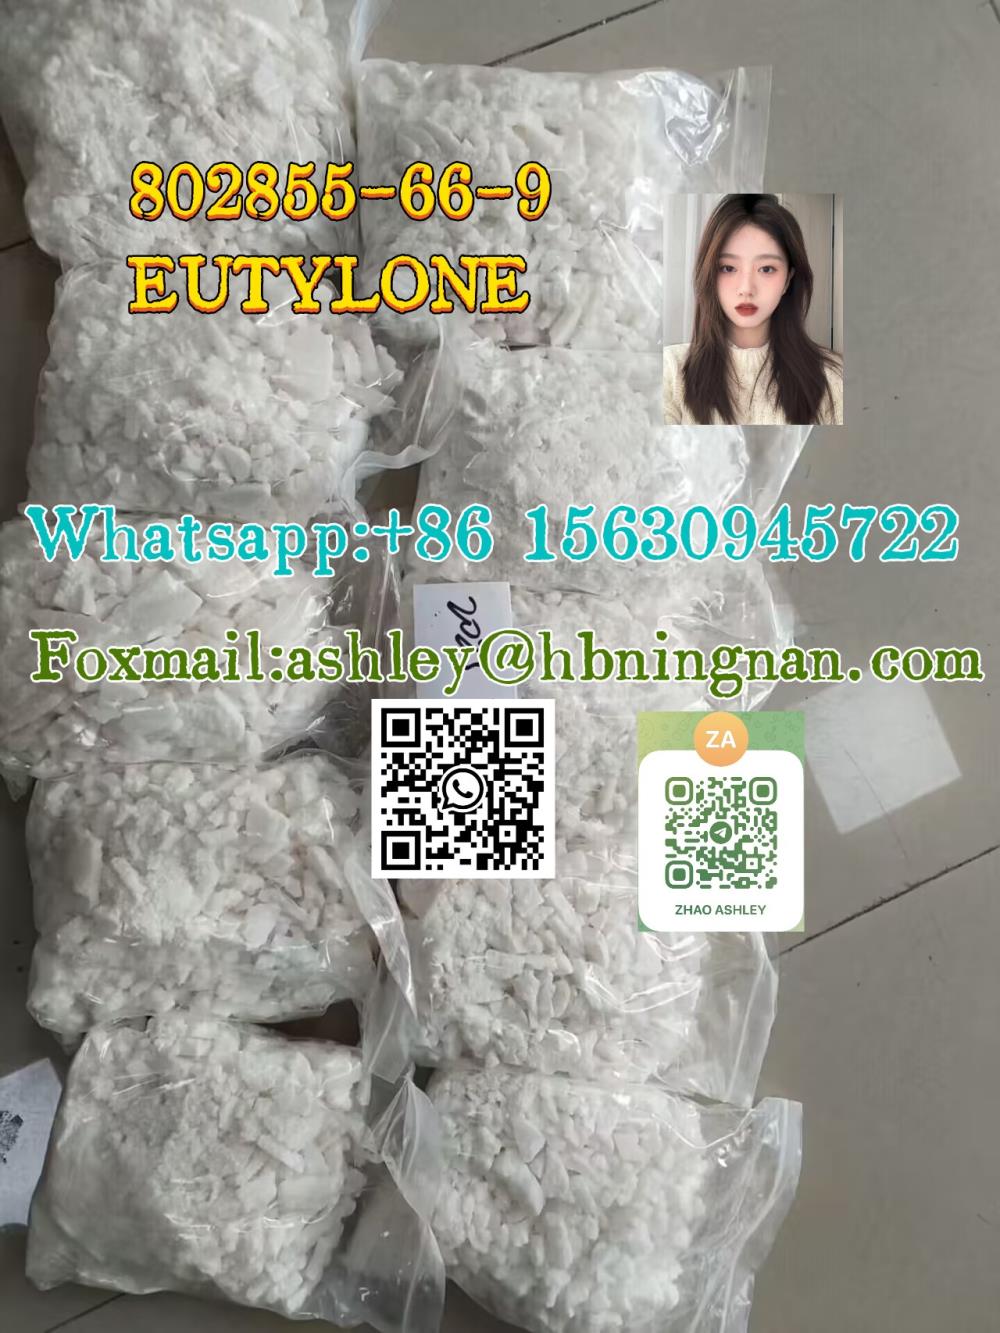 802855-66-9 EUTYLONE Factory wholesale supply, competitive price!,802855-66-9 EUTYLONE,ningnan ,Custom Manufacturing and Fabricating/Bending Services